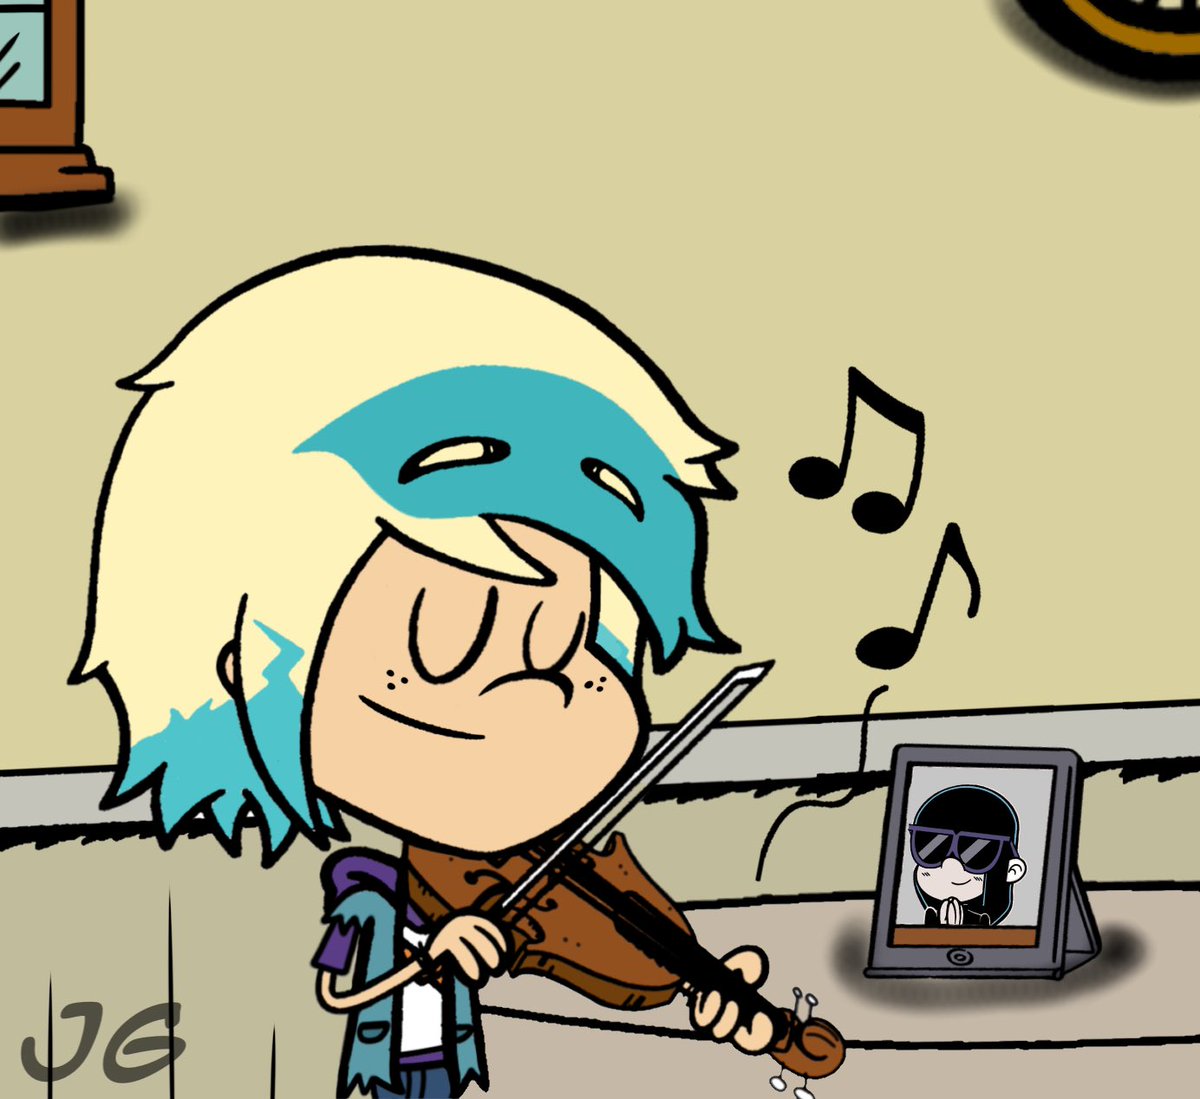 A private show for one of his biggest fans 

#LaithLoud #LucyLoud